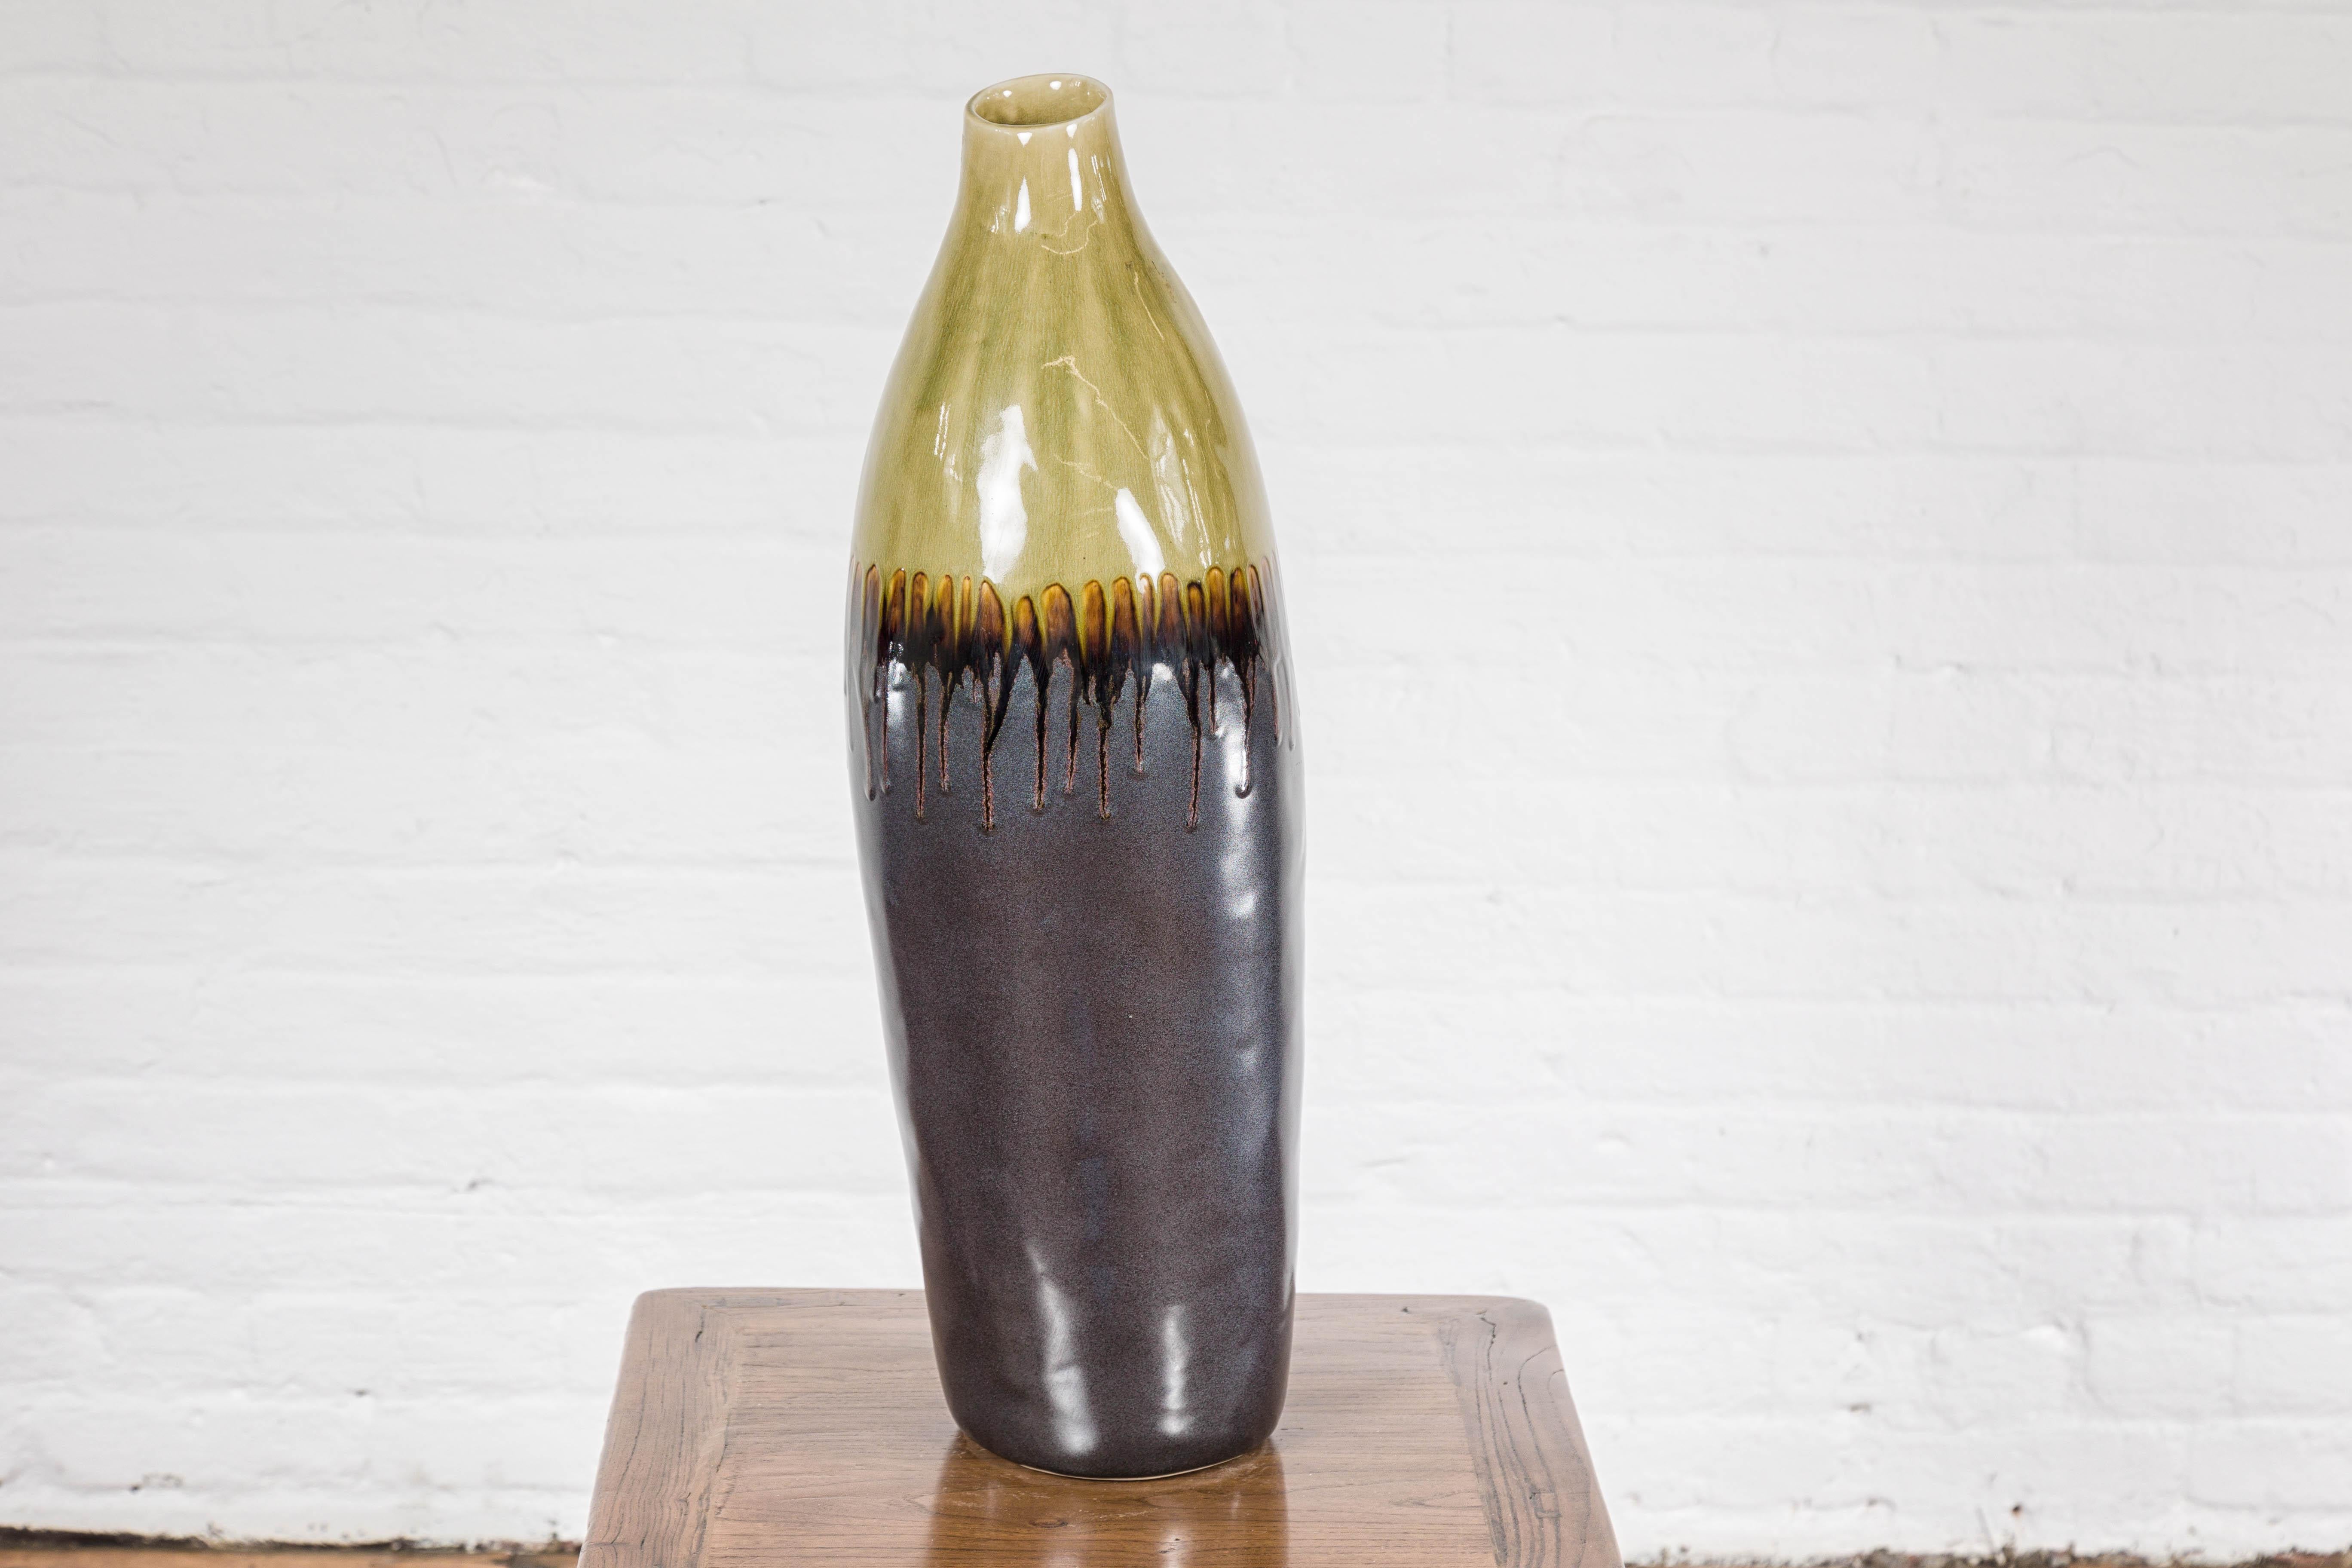 Contemporary Handmade Artisan Ceramic Vase with Olive Green, Dark Grey and Brown Dripping For Sale